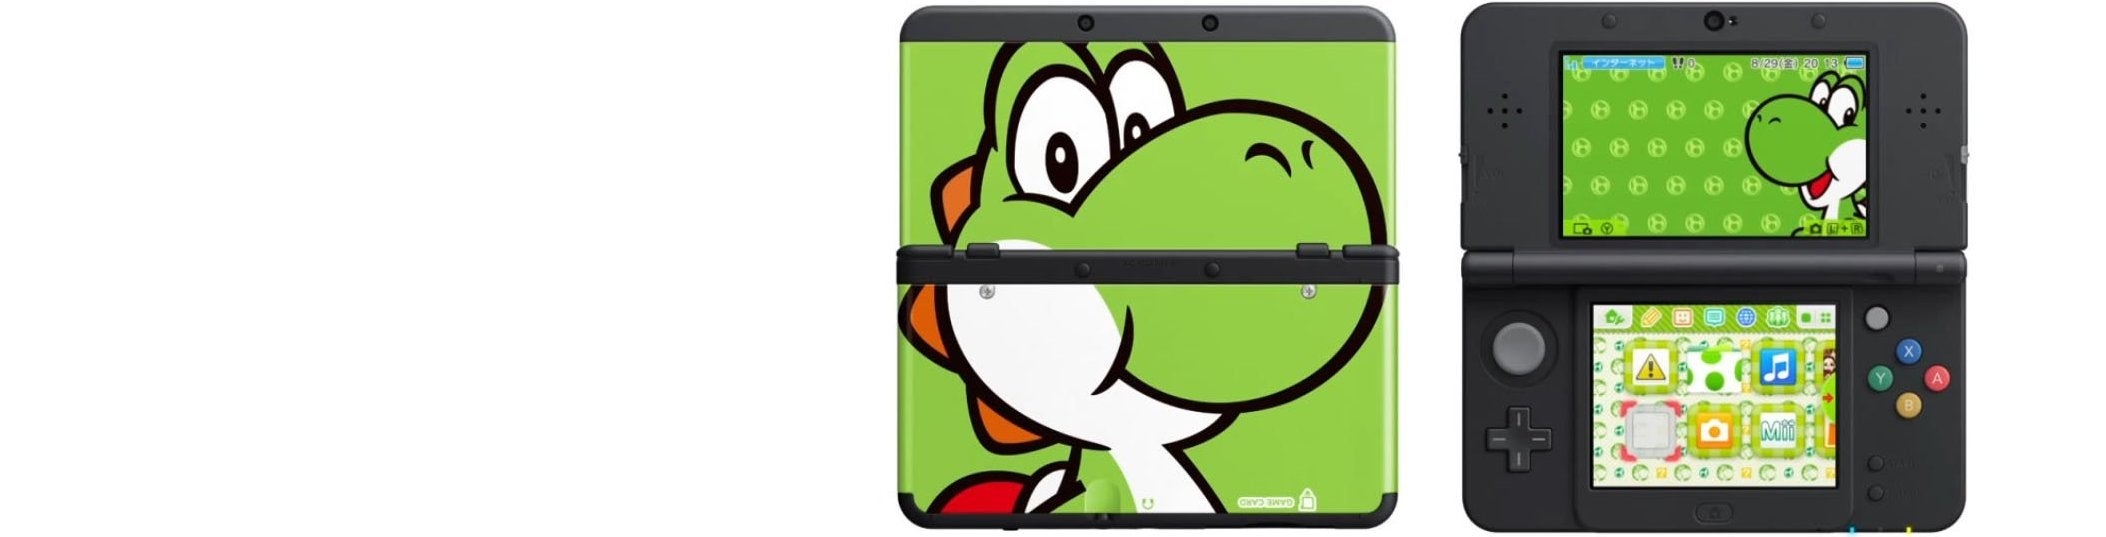 Image for New Nintendo 3DS review